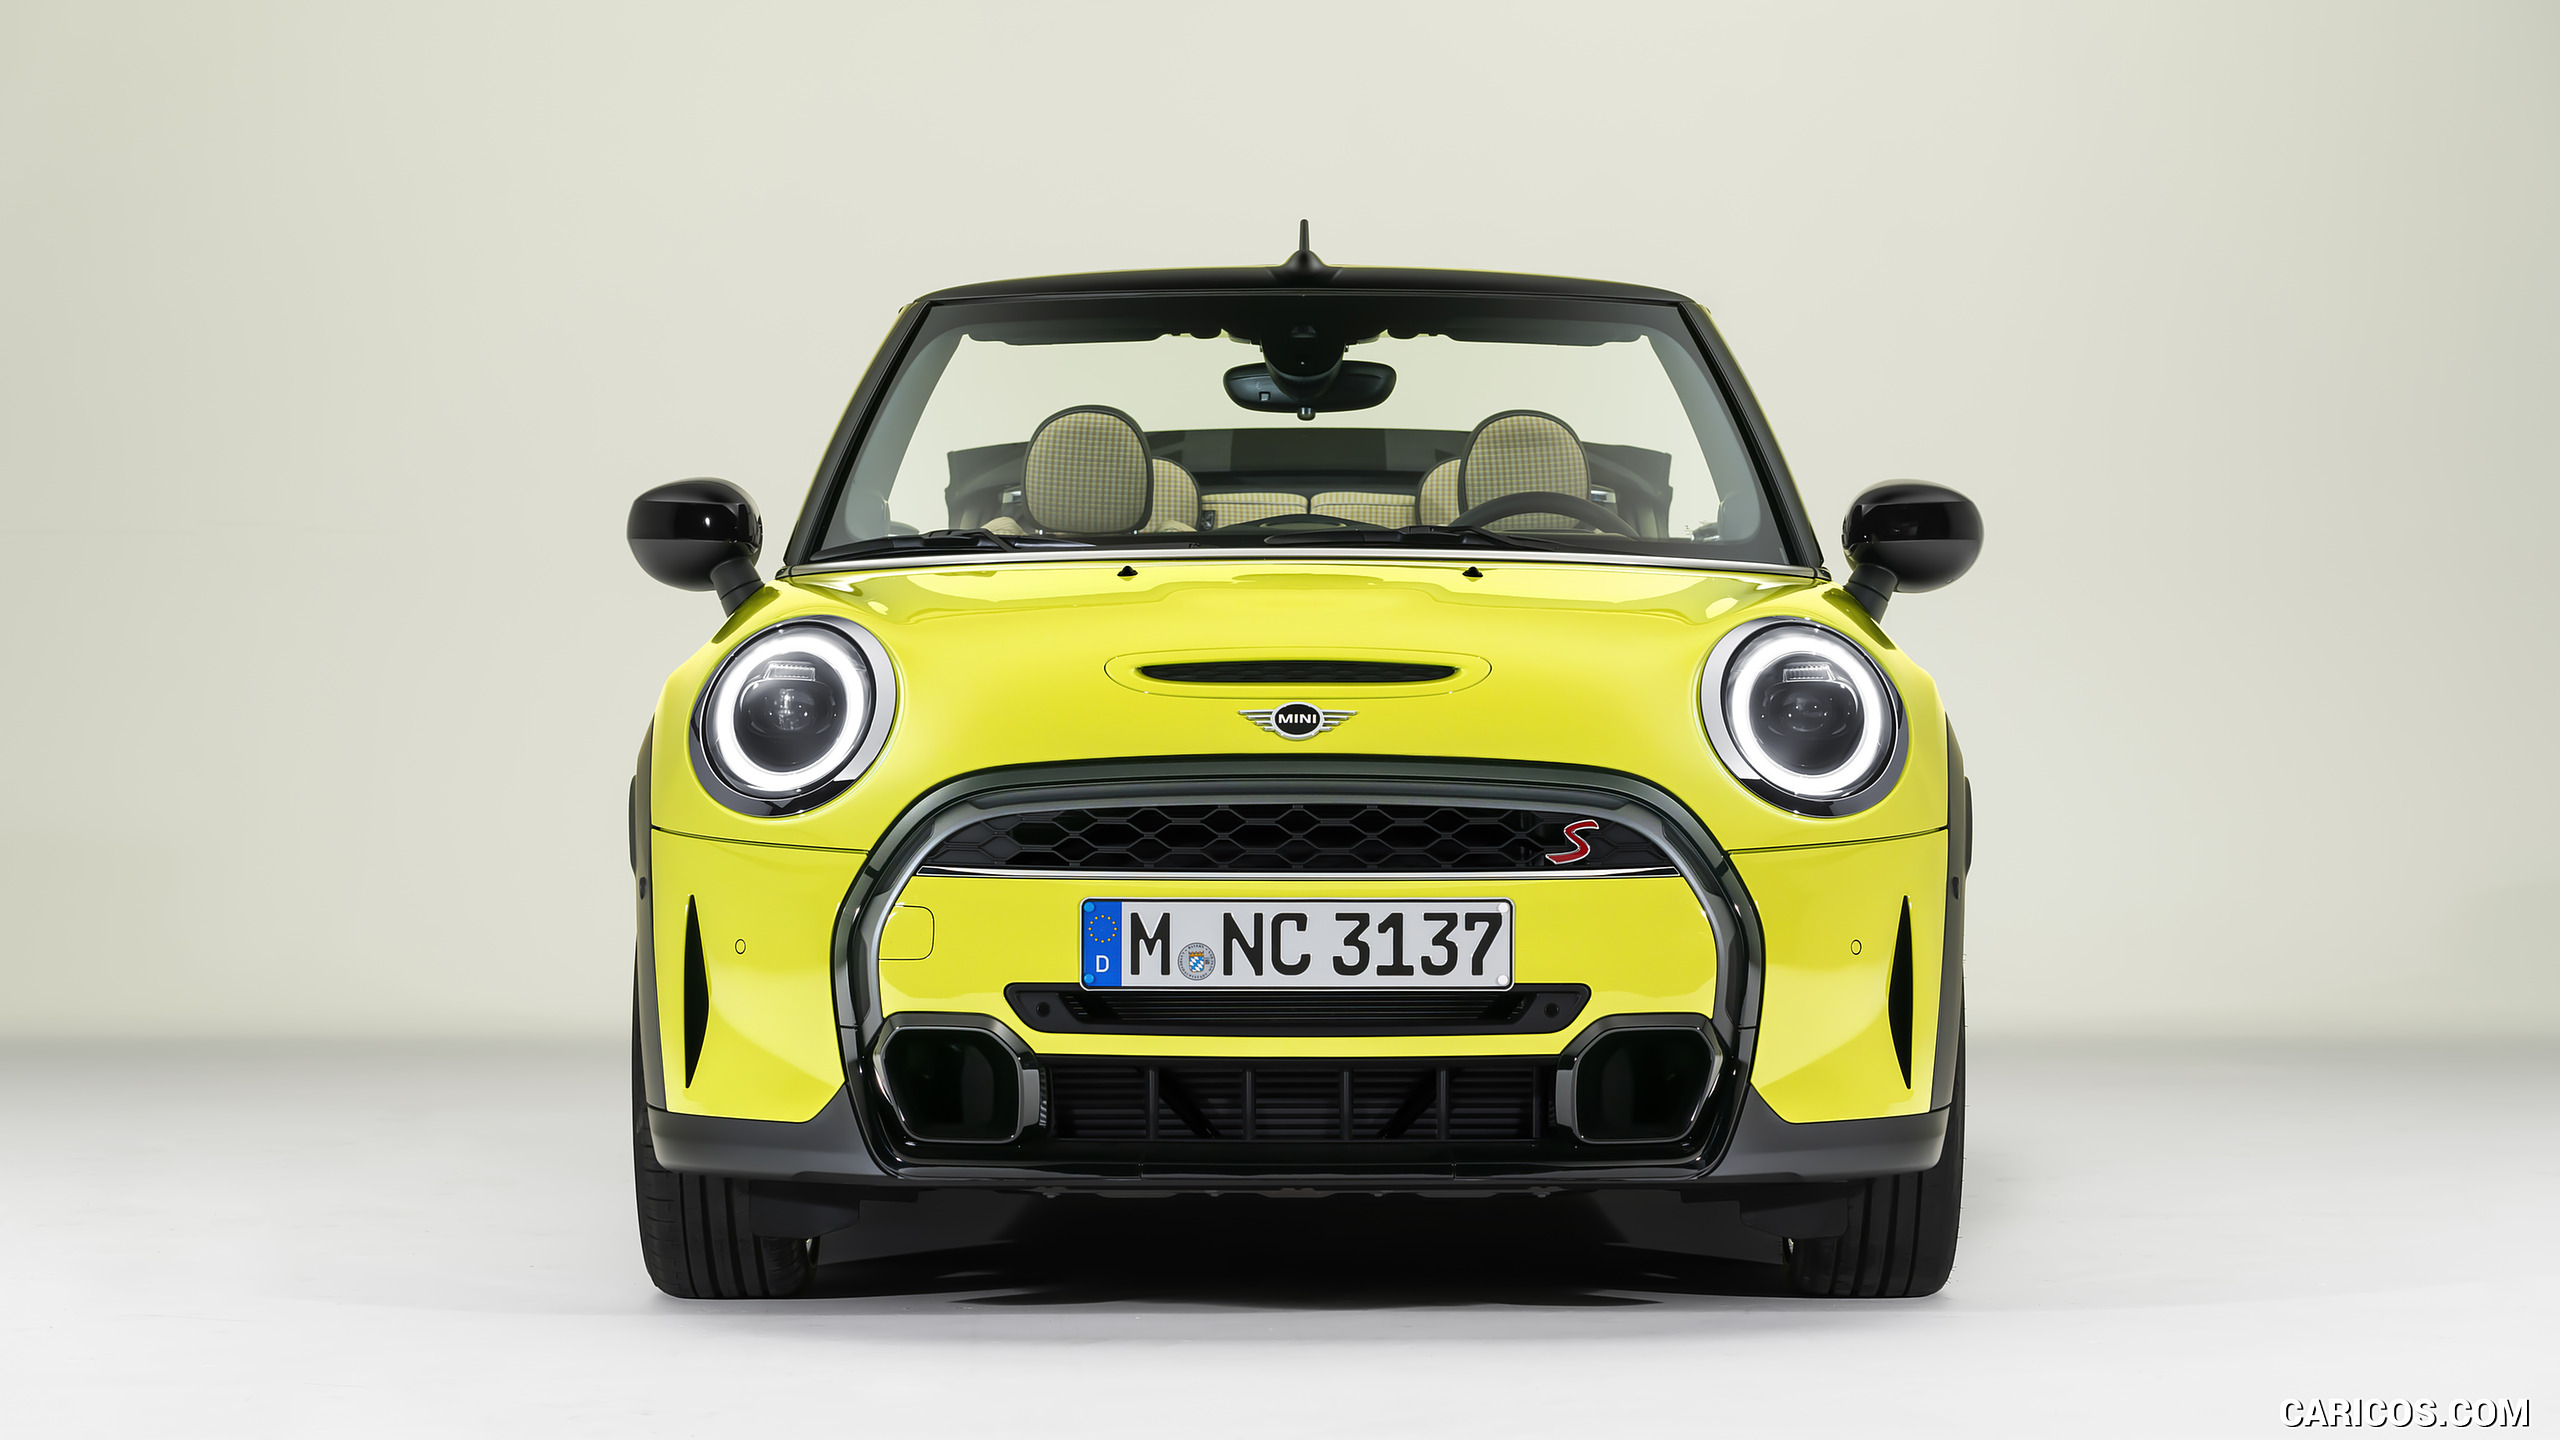 2022 MINI Cooper S Convertible - Front, #23 of 132